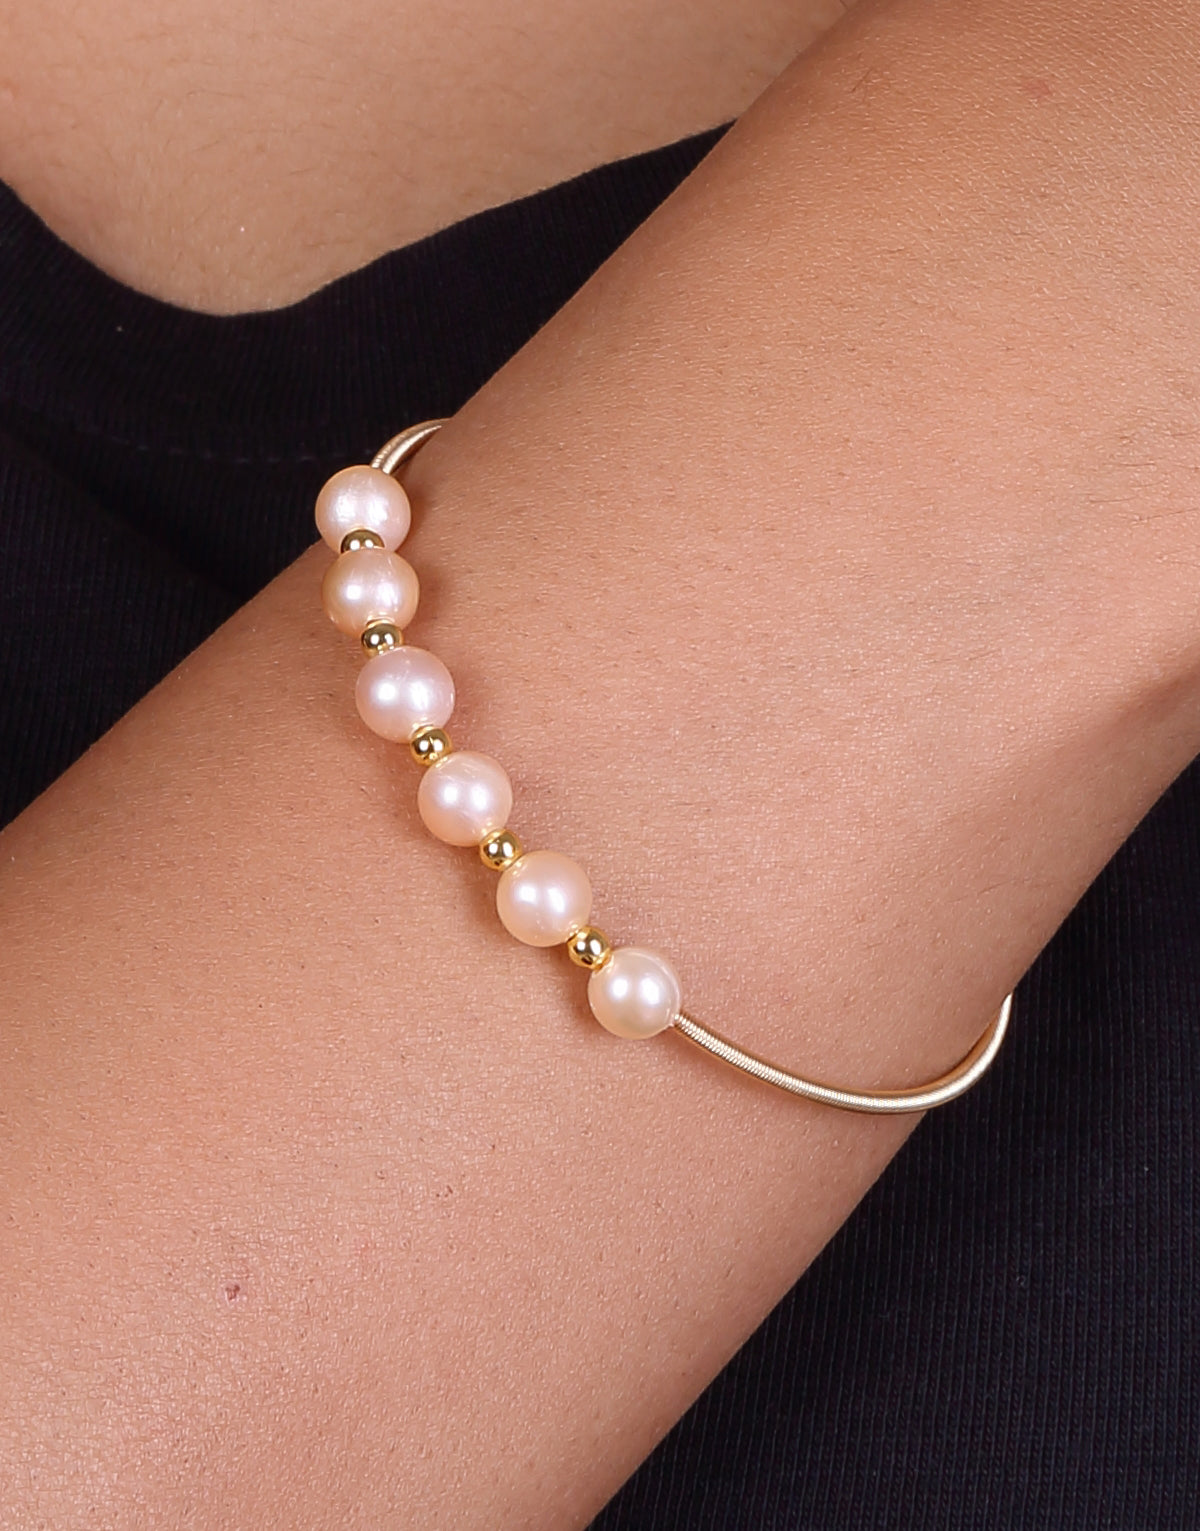 Obmyec Simple Hand Chain Pearl Finger Ring Bracelets India | Ubuy